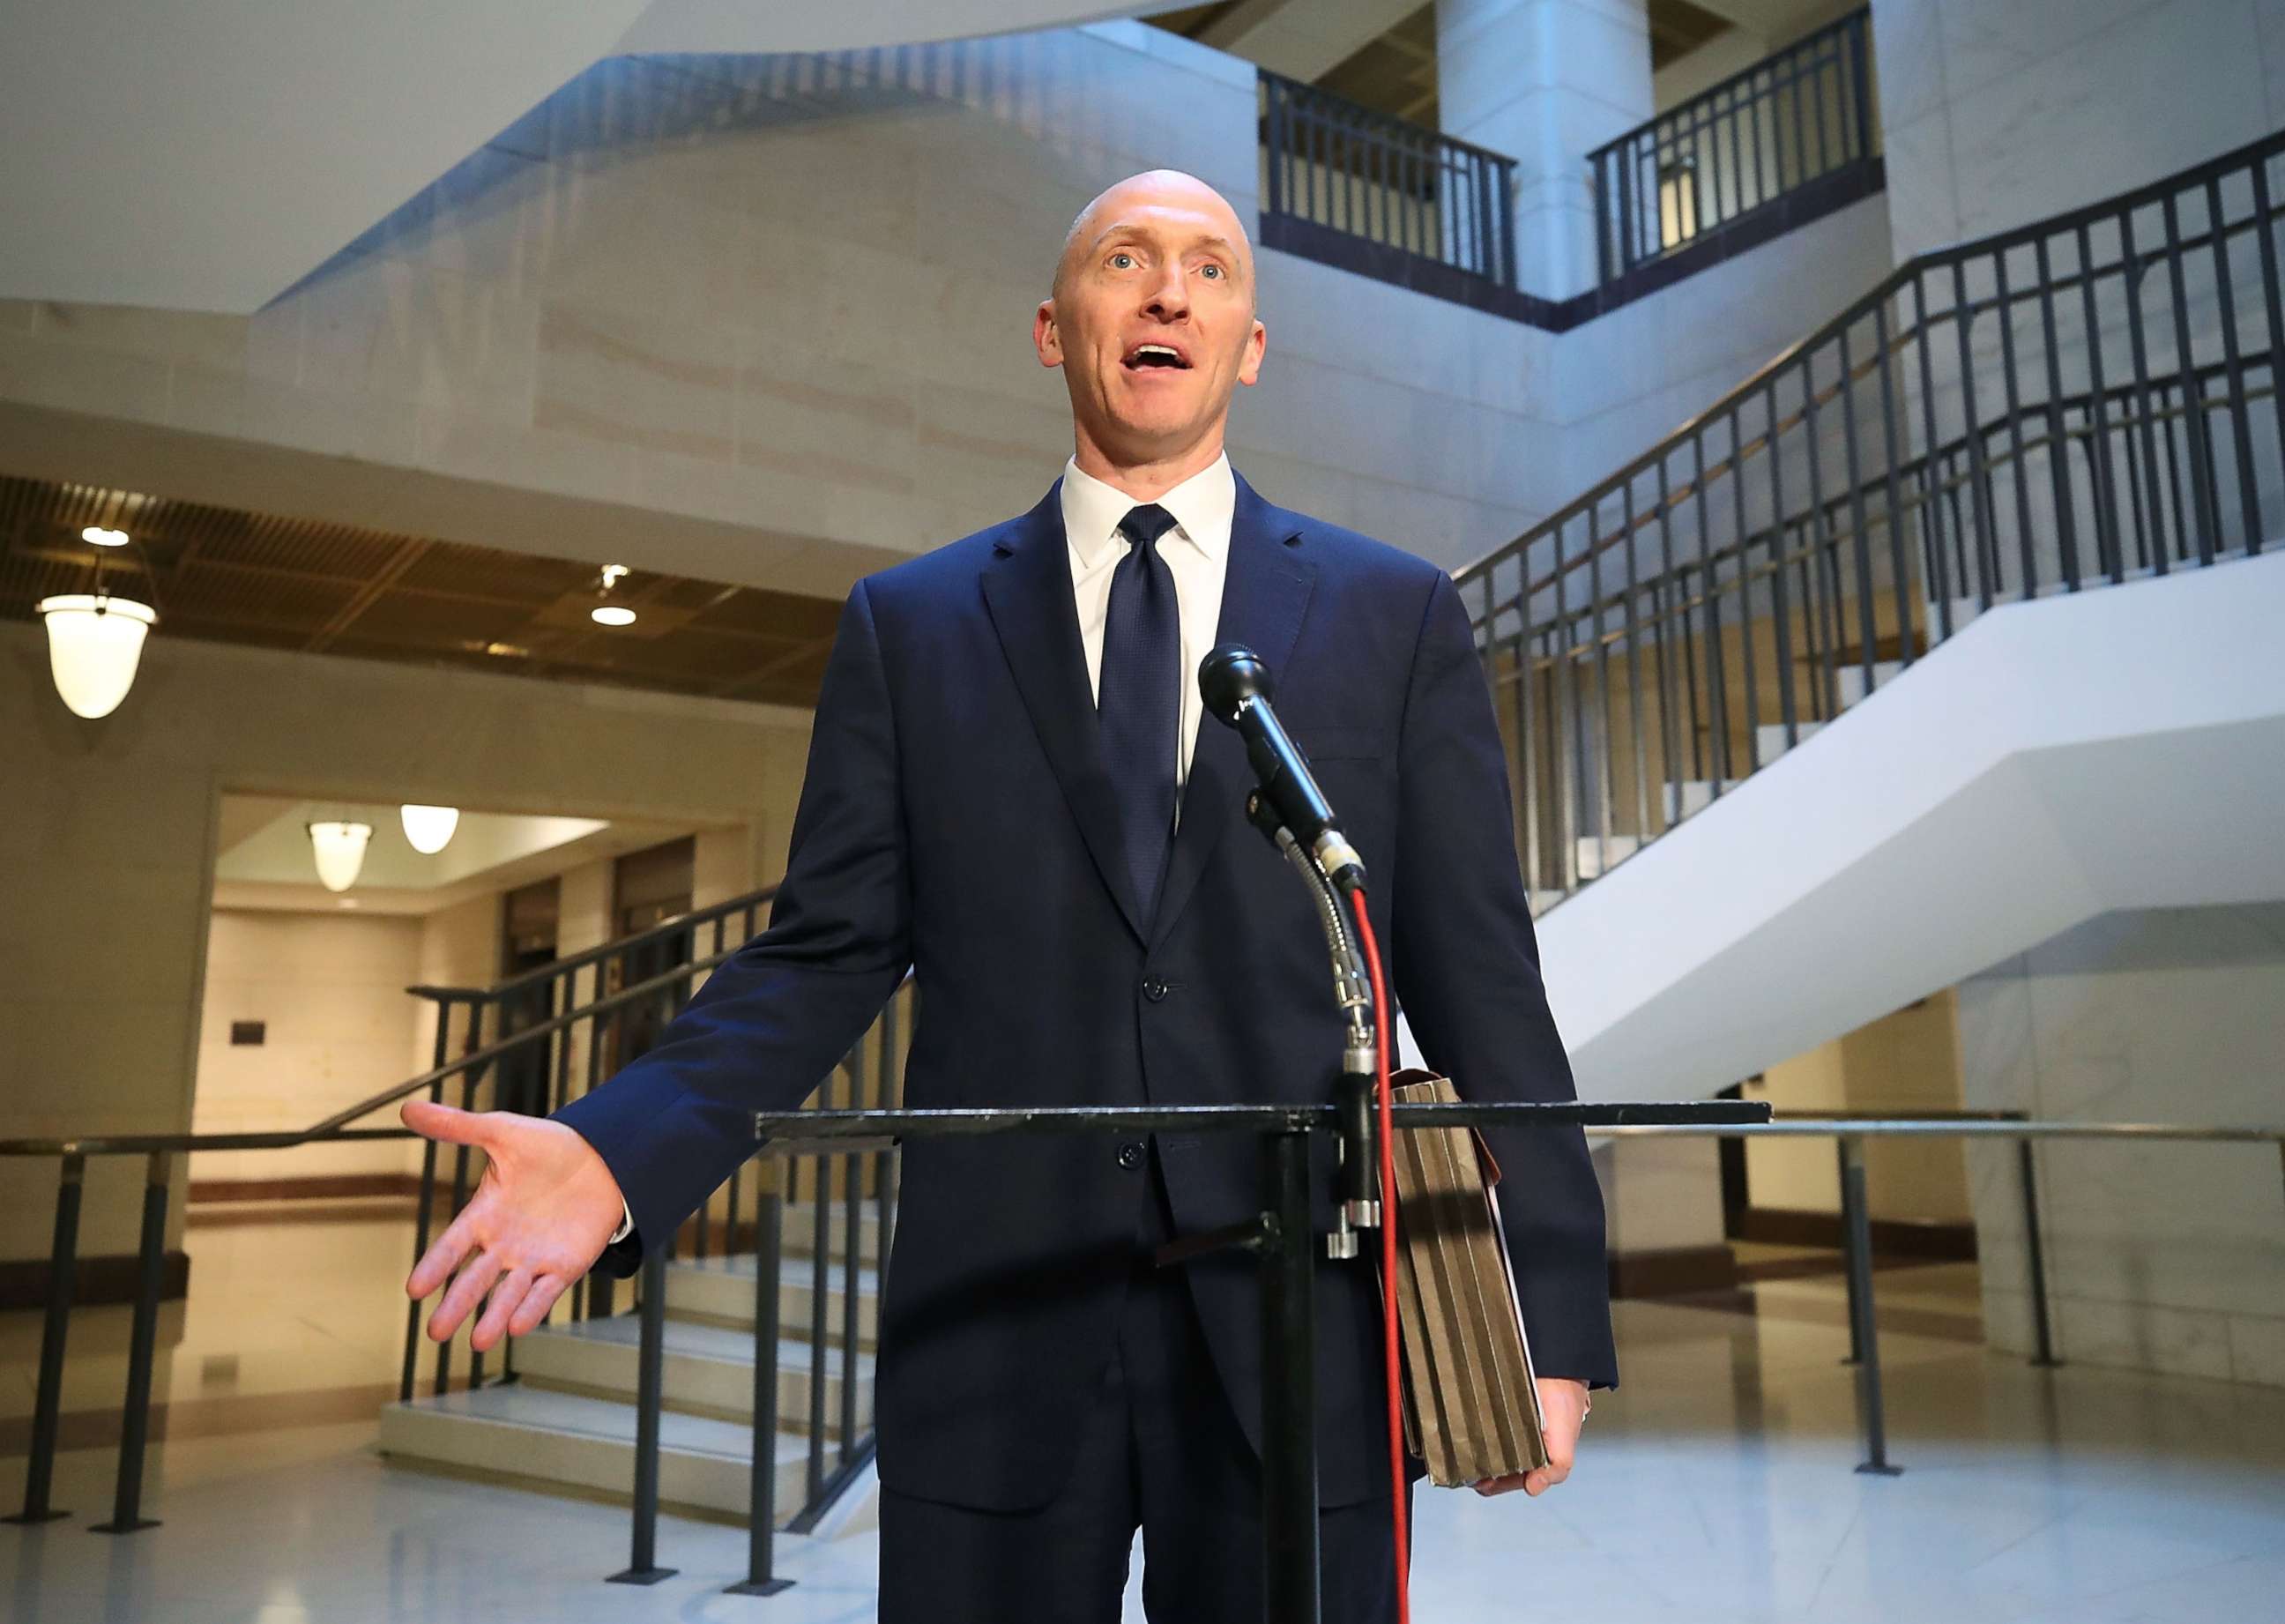 PHOTO: Carter Page, former foreign policy adviser for the Trump campaign, speaks to the media after testifying before the House Intelligence Committee, Nov. 2, 2017 in Washington, D.C.